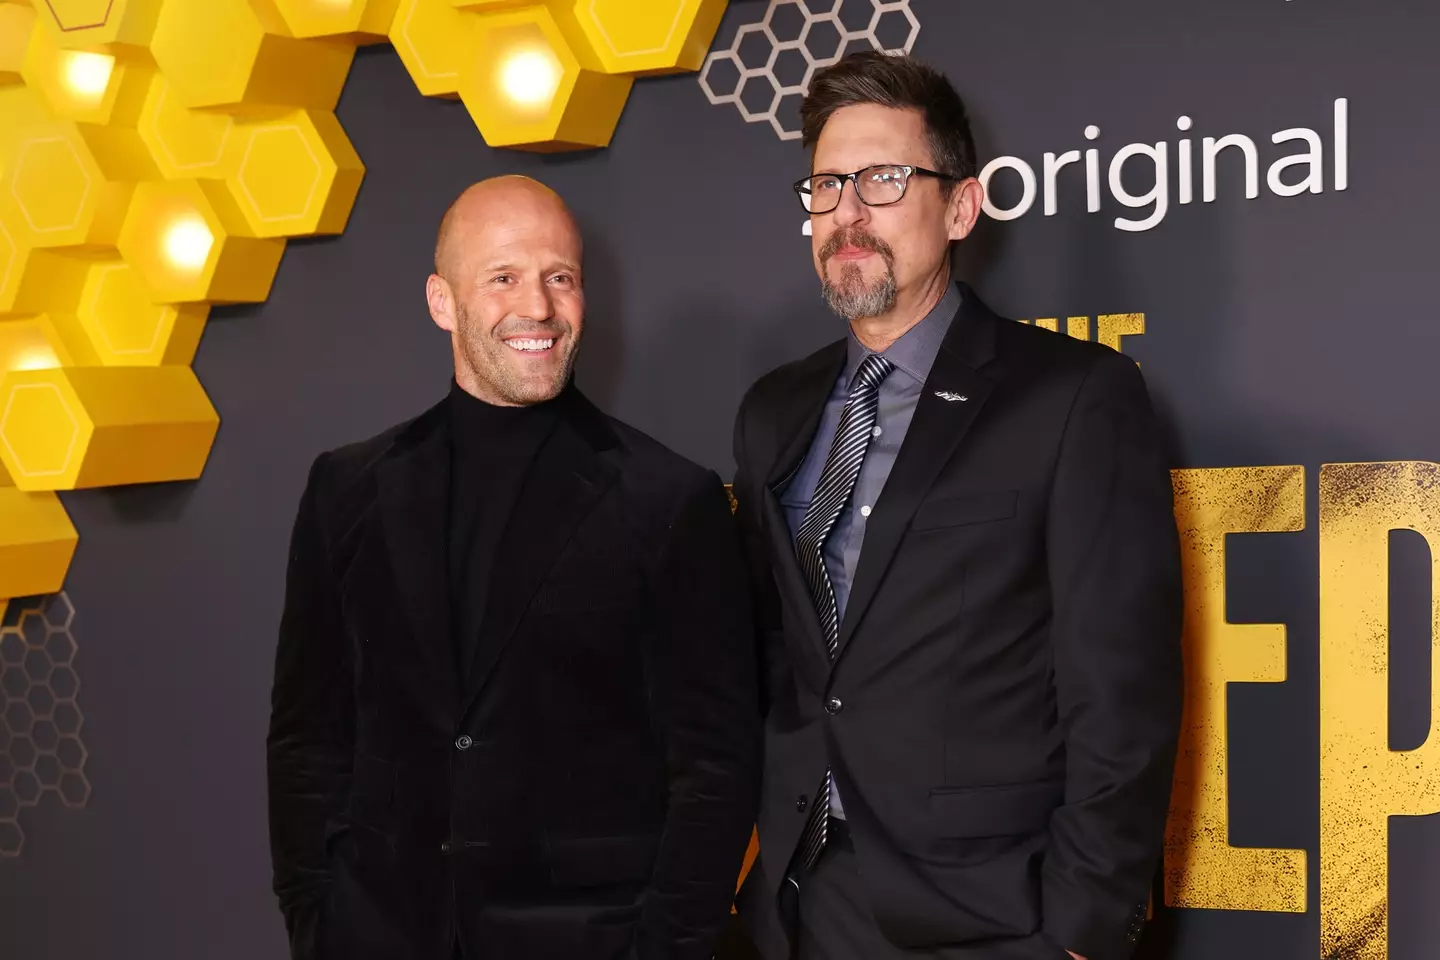 Jason Statham and David Ayer attend the premier of The Beekeeper at Vue Leicester Square.